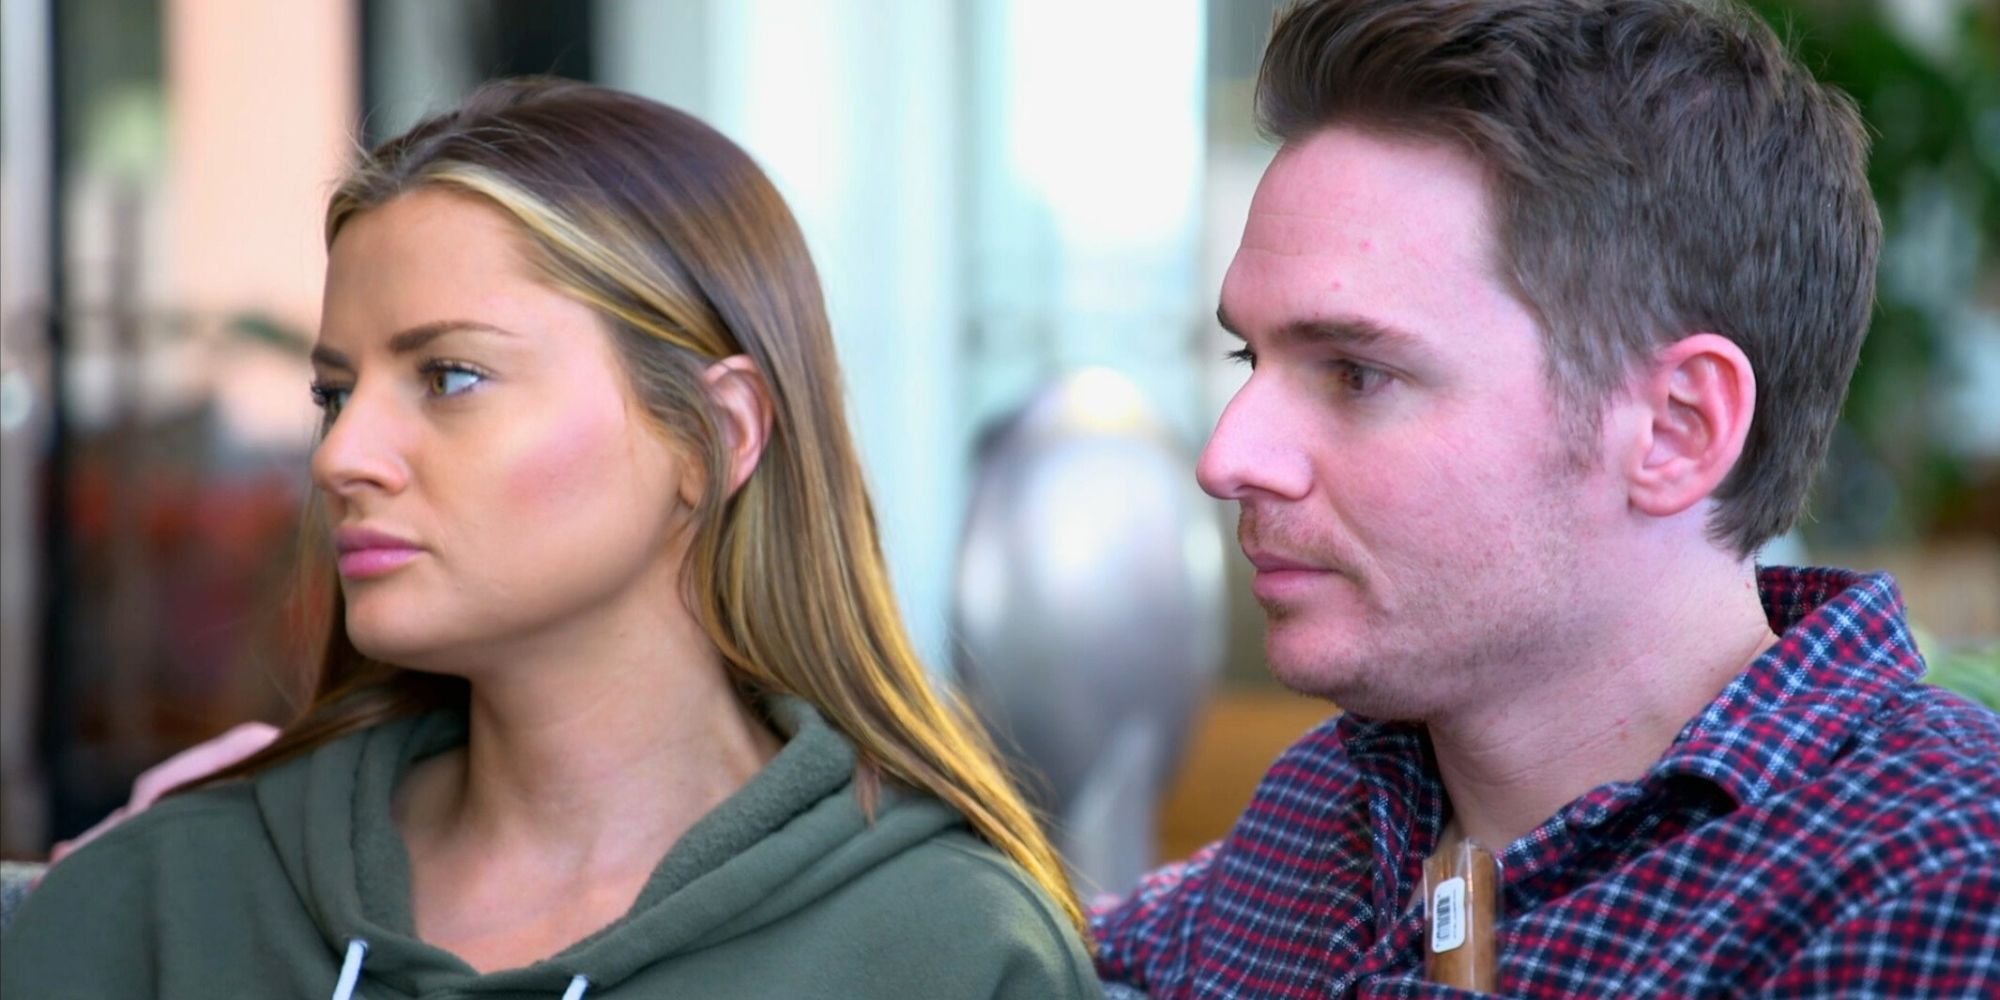 Clare Kerr and Cameron Frazer from Married at FIrst SIght season 17 looking in same direction